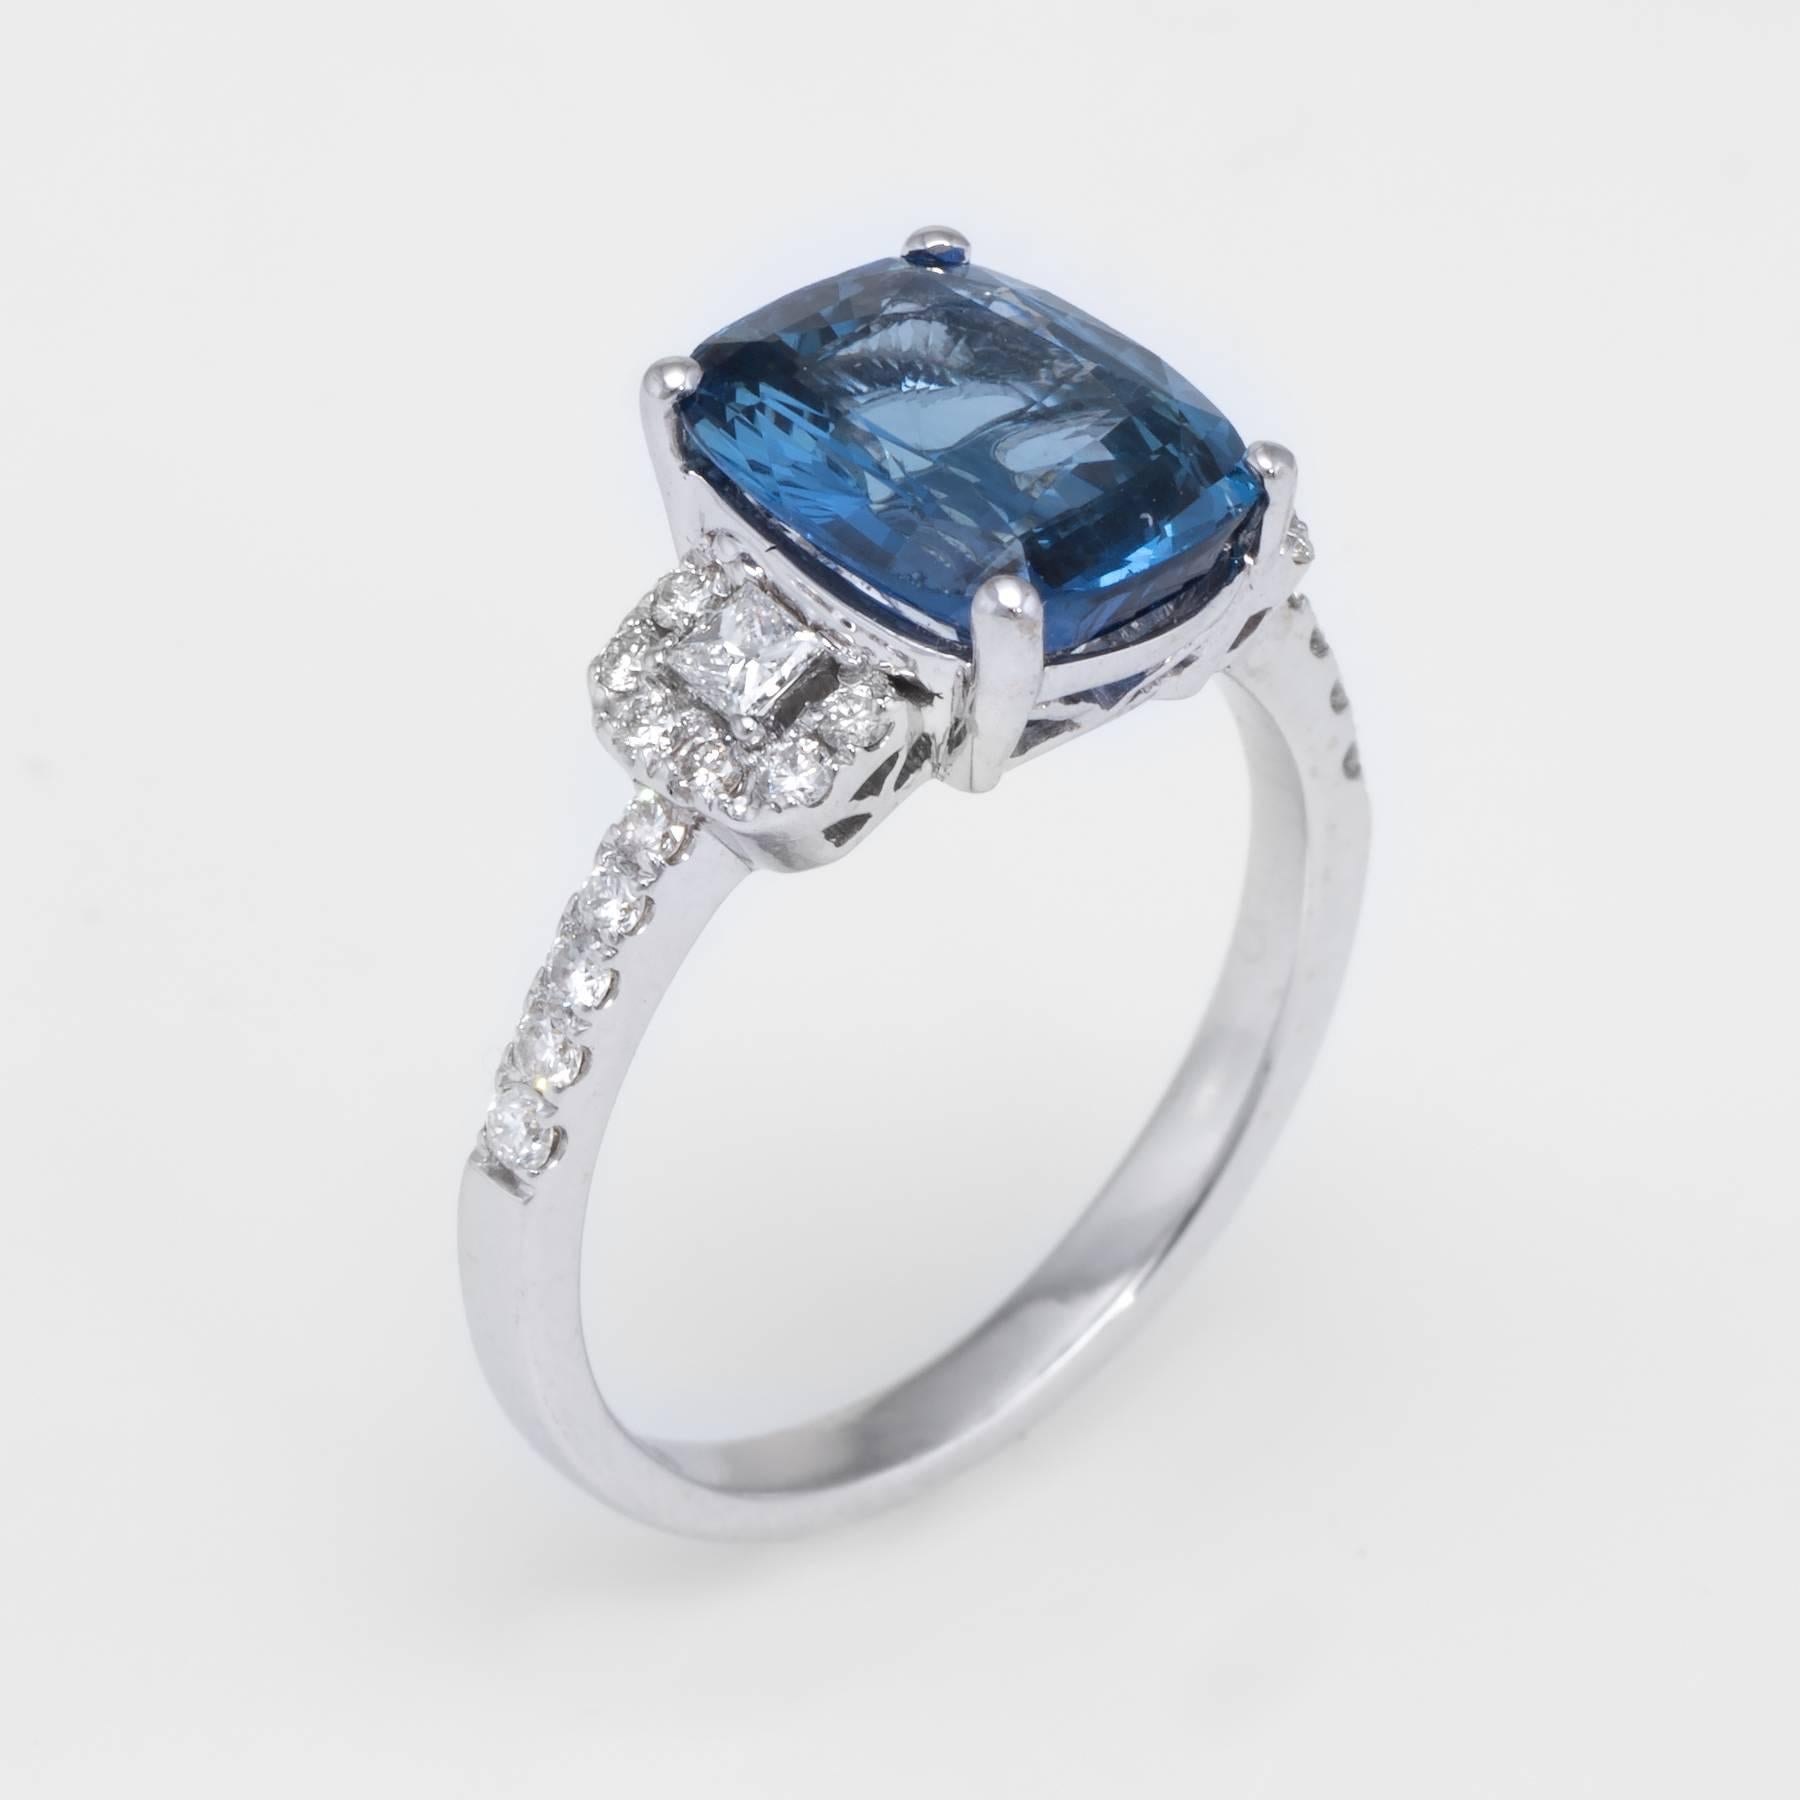 Overview:

Elegant estate ring, crafted in 18 karat white gold. 

Centrally mounted cushion cut natural blue sapphire measures 9.71 x 8.47 x 4.93mm. The sapphire weighs 3.67 carats. The transparent Madagascar sapphire is GIA certified (no